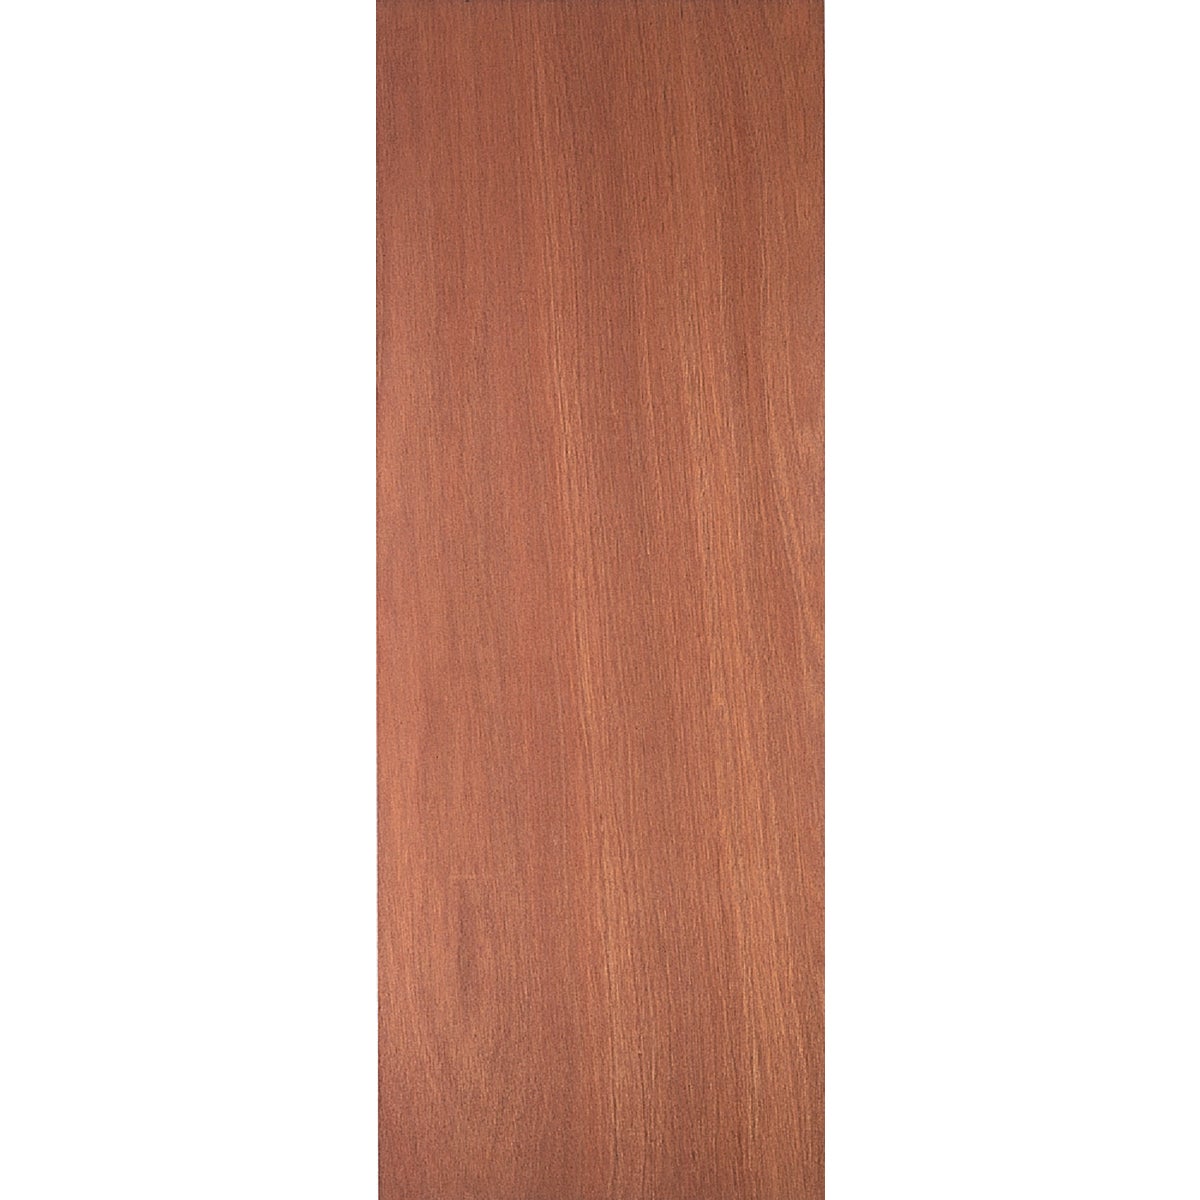 Item 161737, Full and square edge lauan door slabs with particle board core have finger 